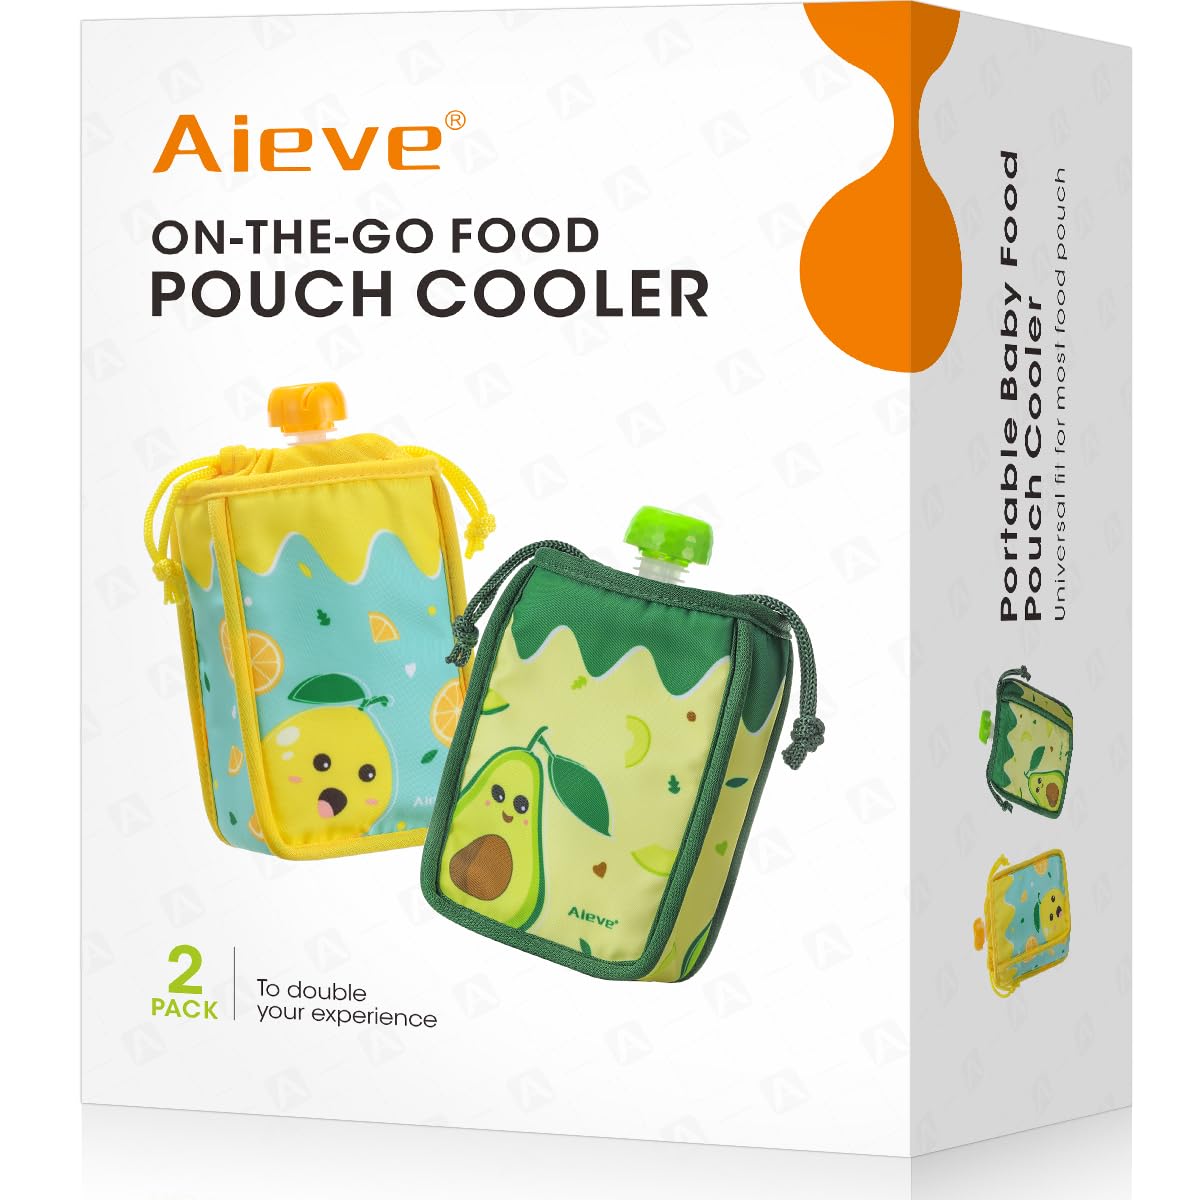 Aieve on-the-go food pouch cooler -green-yellow